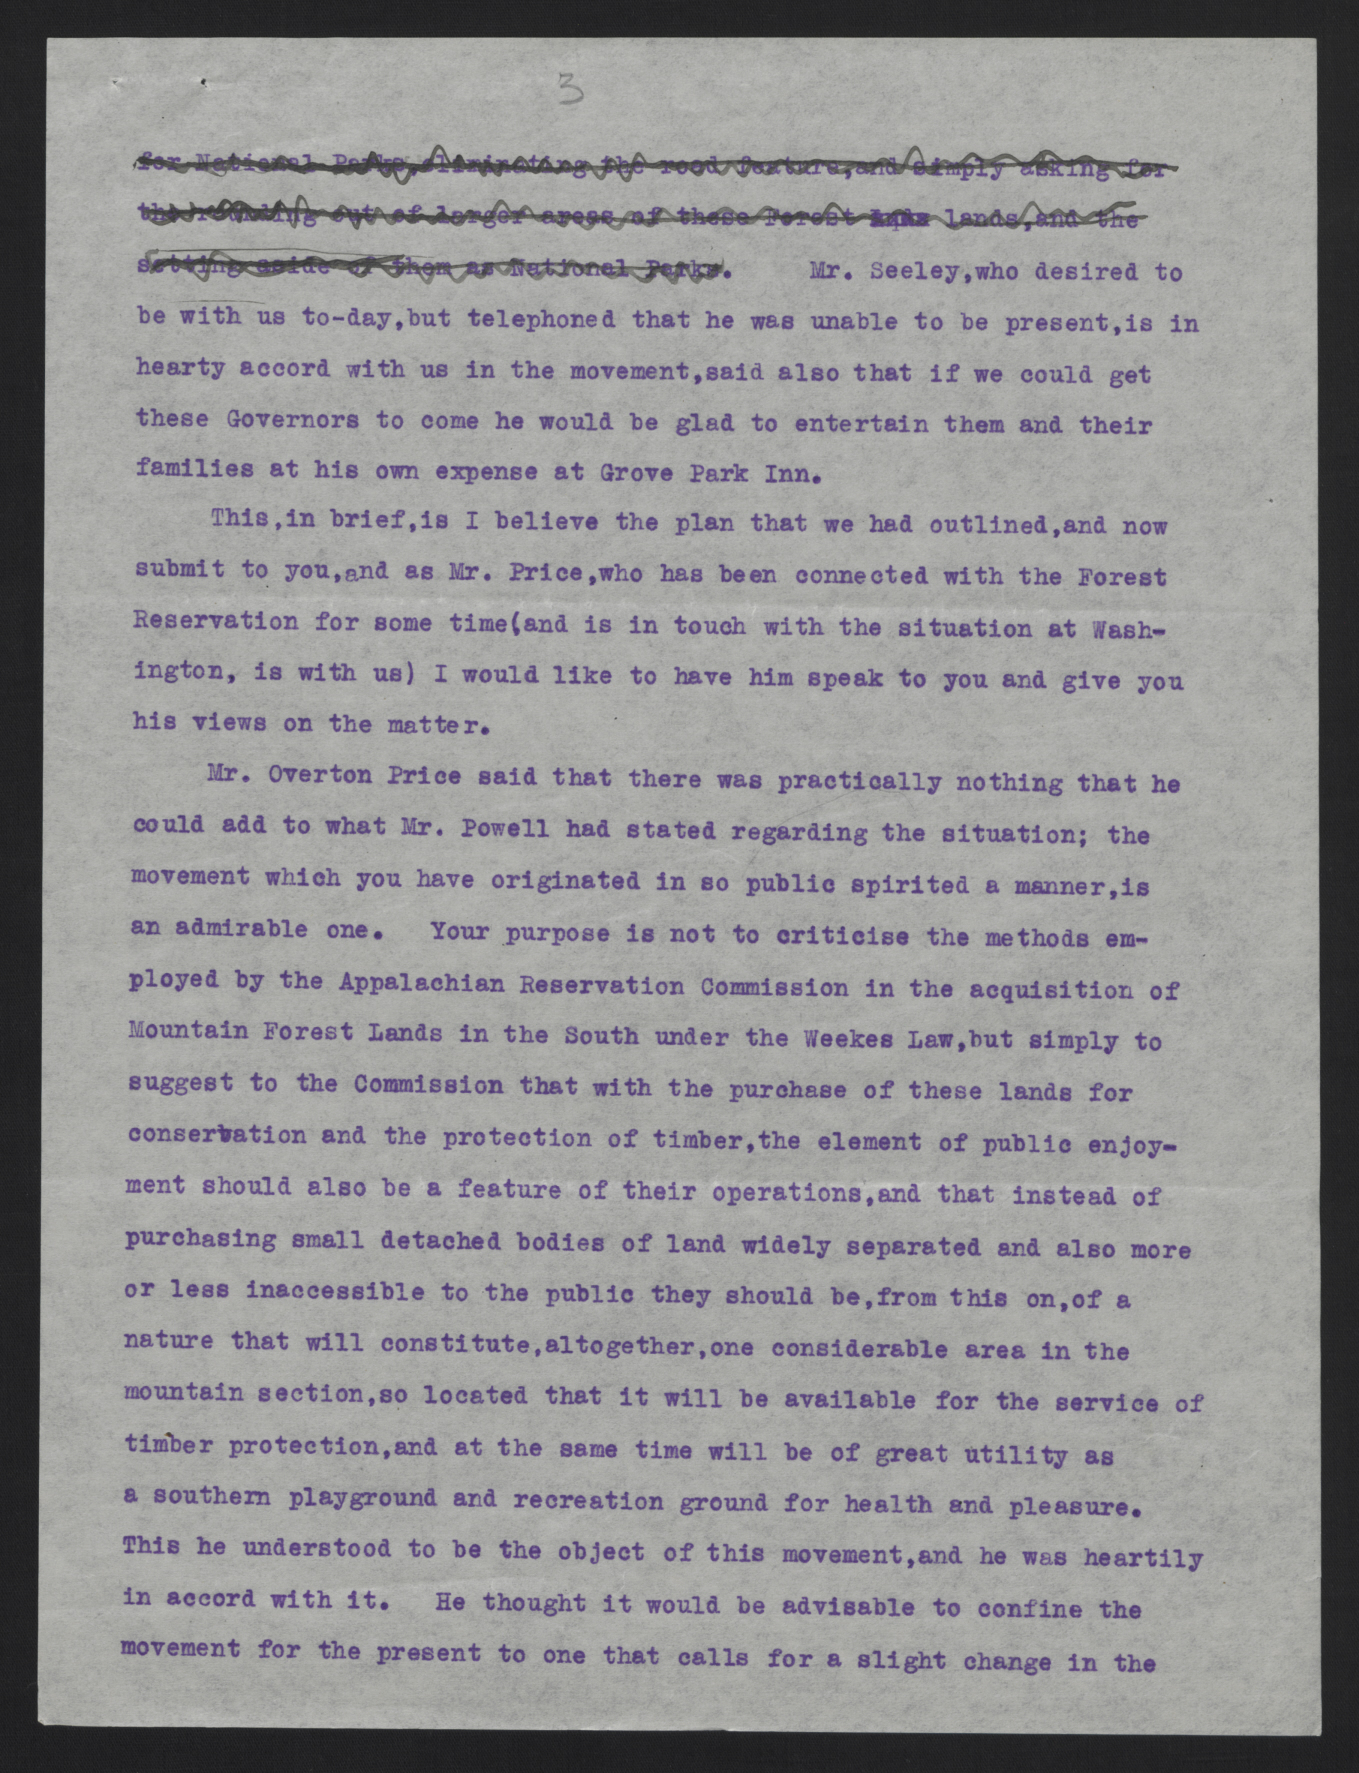 Meeting Minutes of the Greater Western North Carolina Association, 11 October 1913, page 3